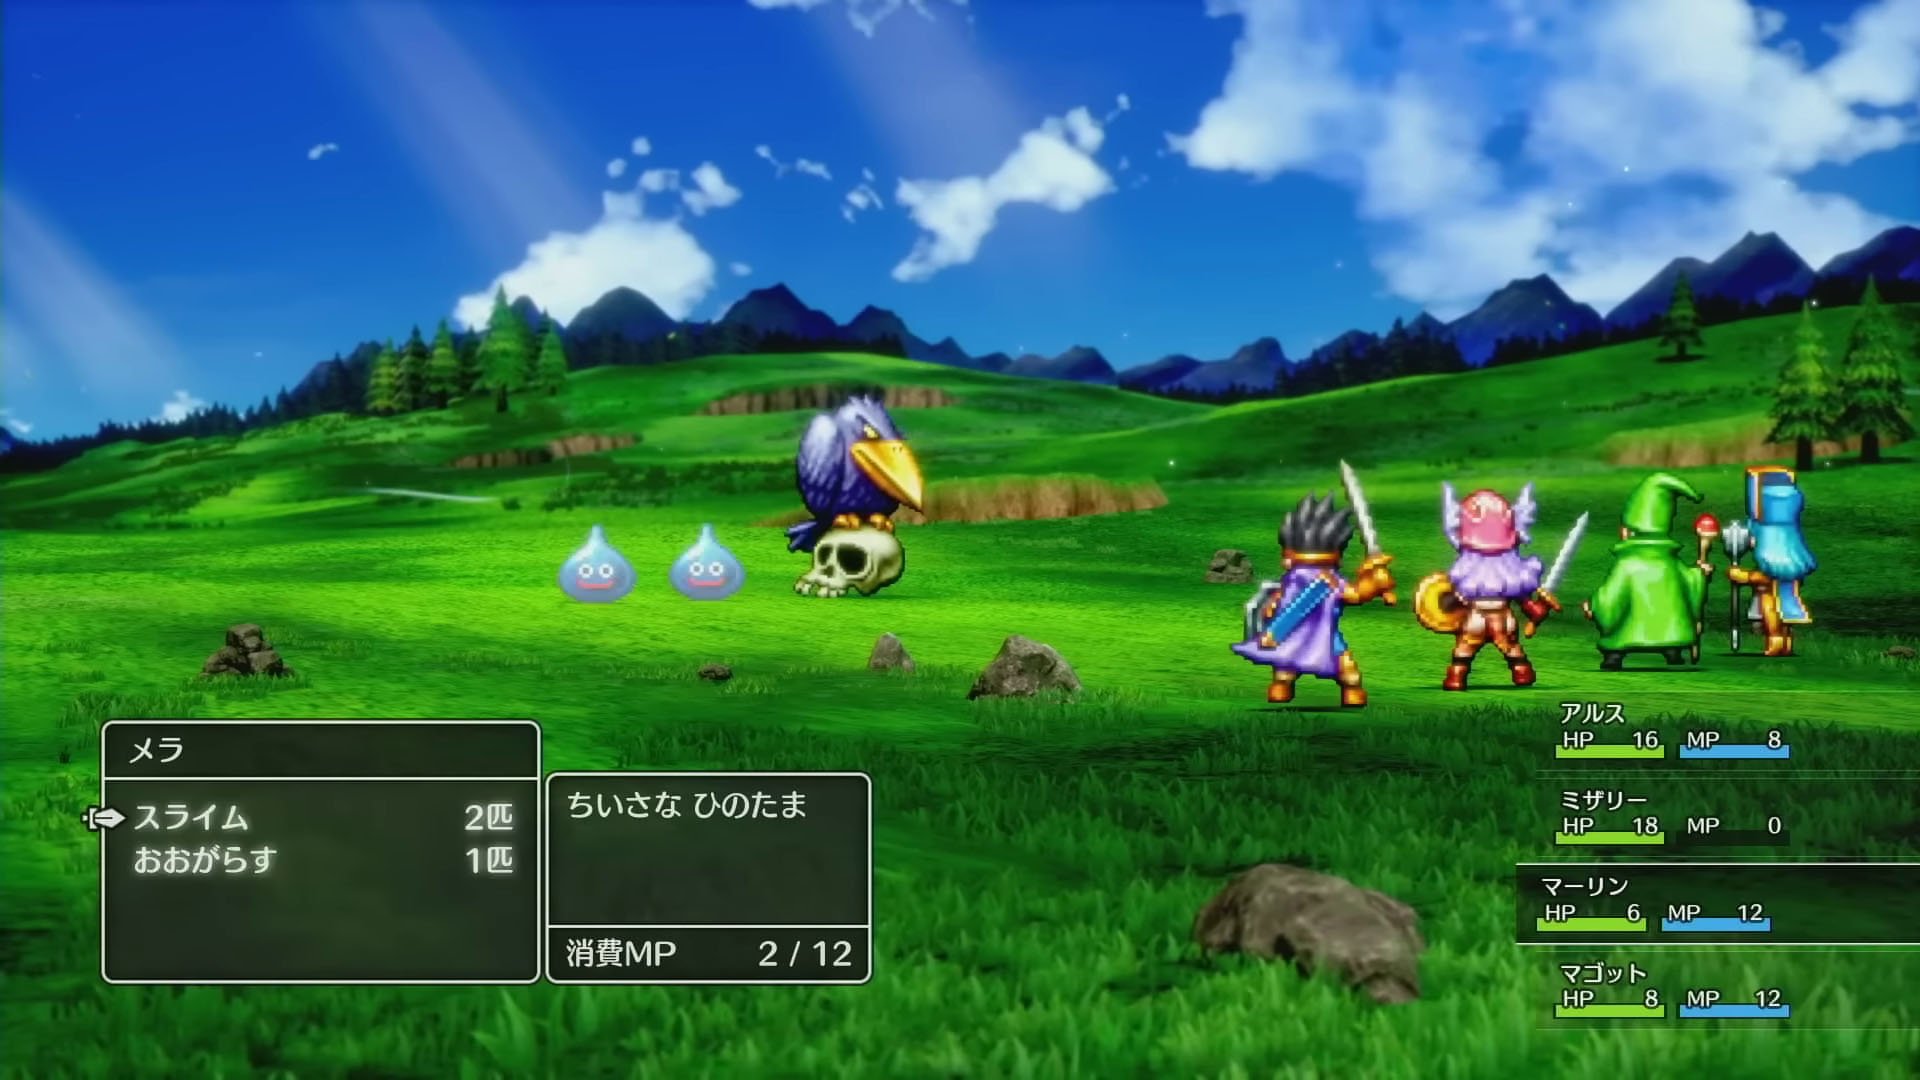 Series Creator Would Like to Bring More Dragon Quest Games to PC After XI